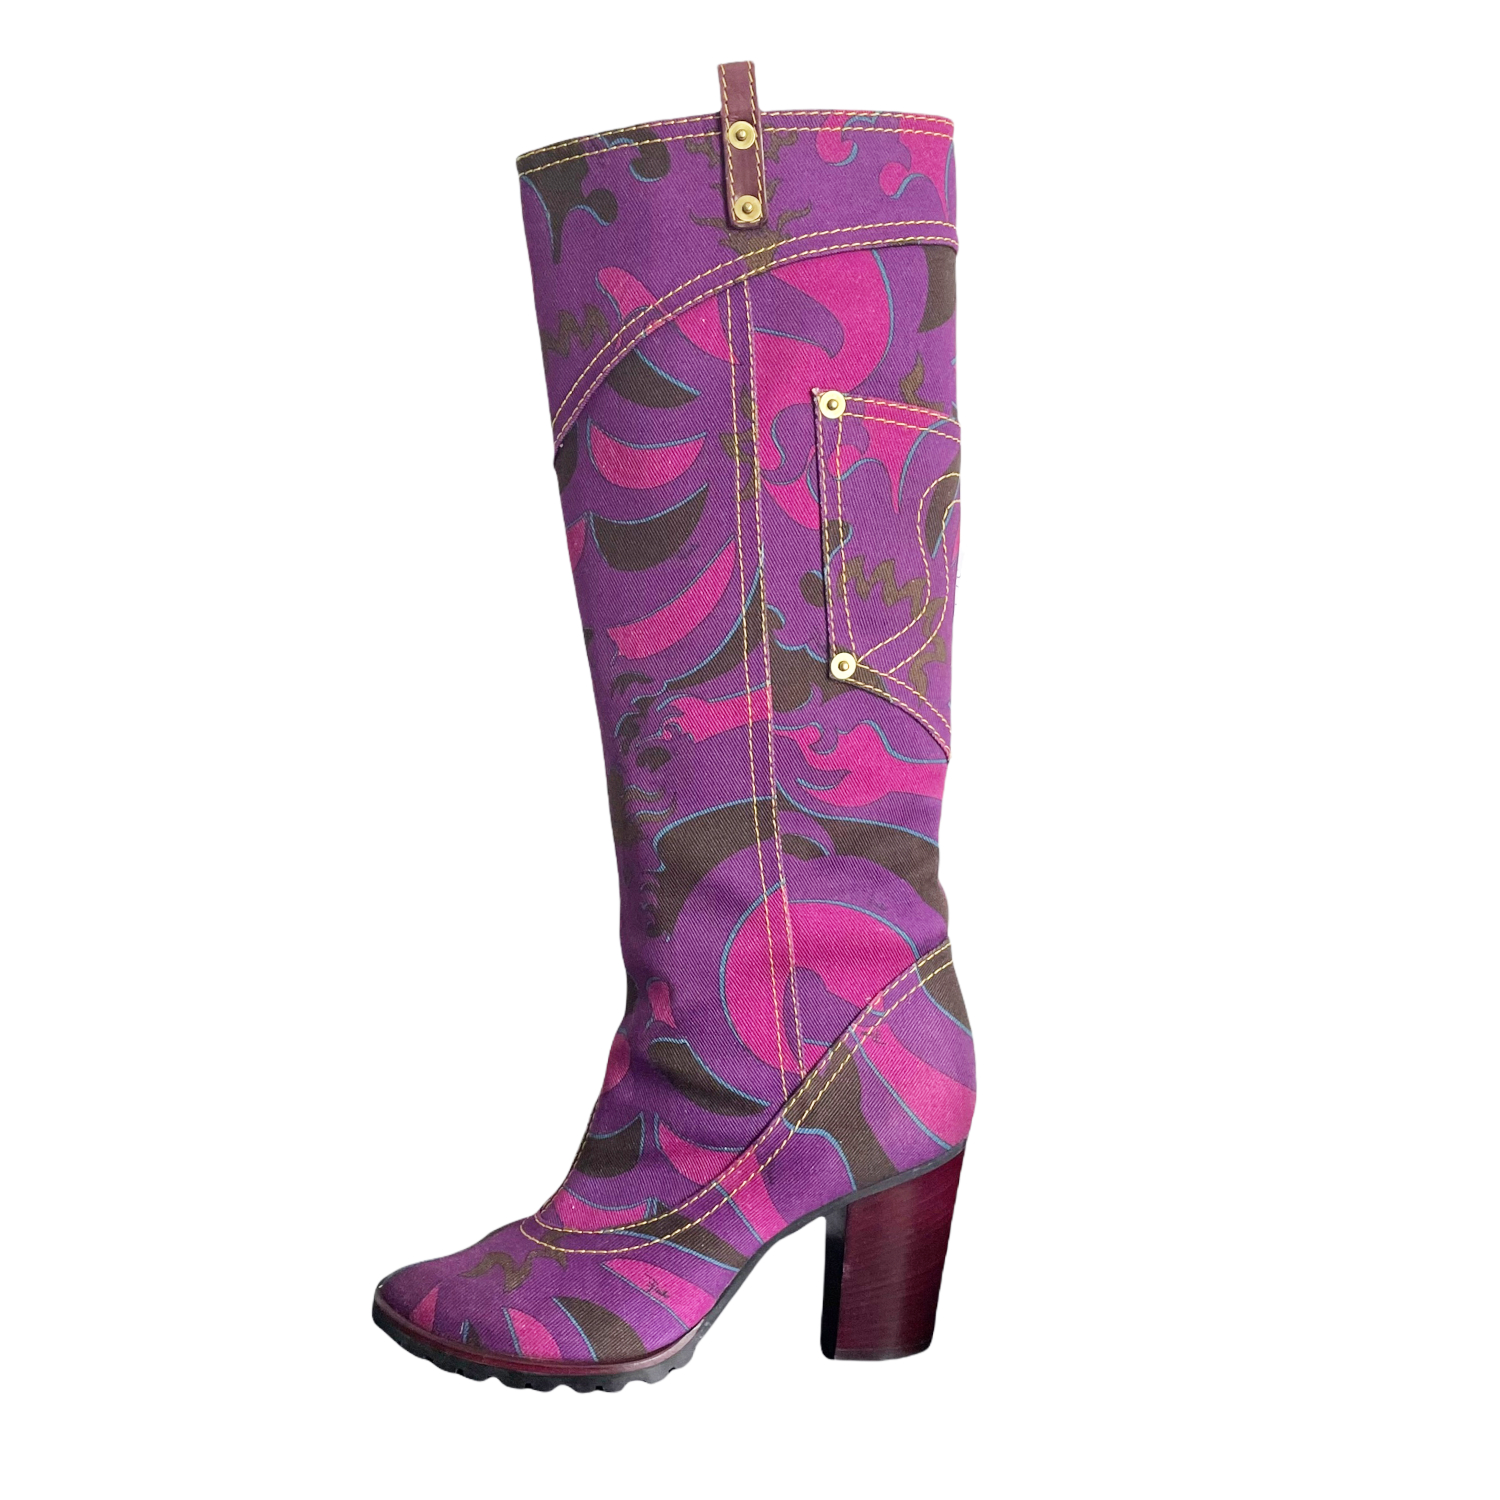 Vintage Emilio Pucci Abstract Denim Boots in Purple UK 4 | NITRYL